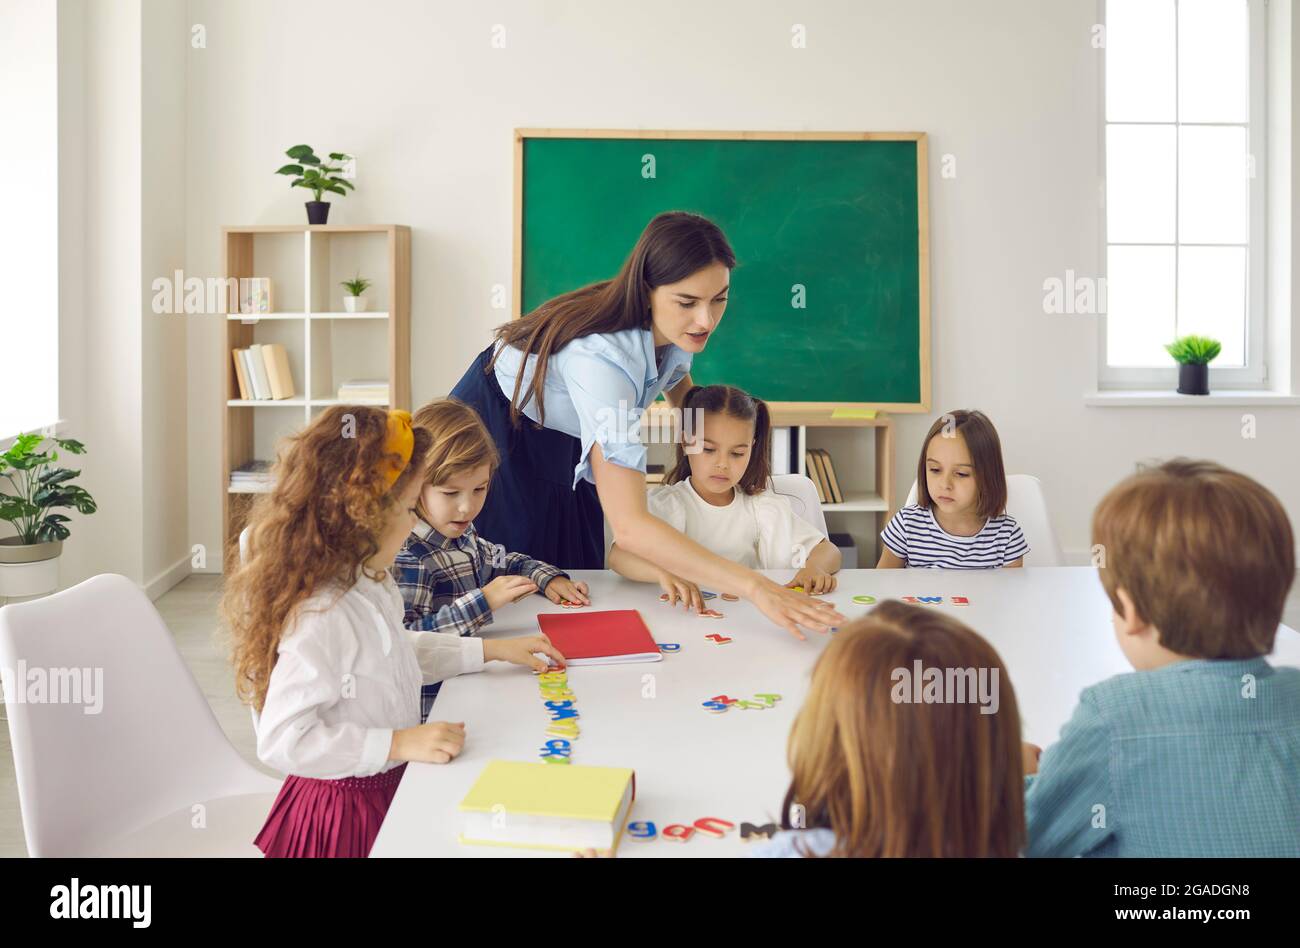 Portrait of diligent schoolkids and teacher studying talking at lesson Stock Photo